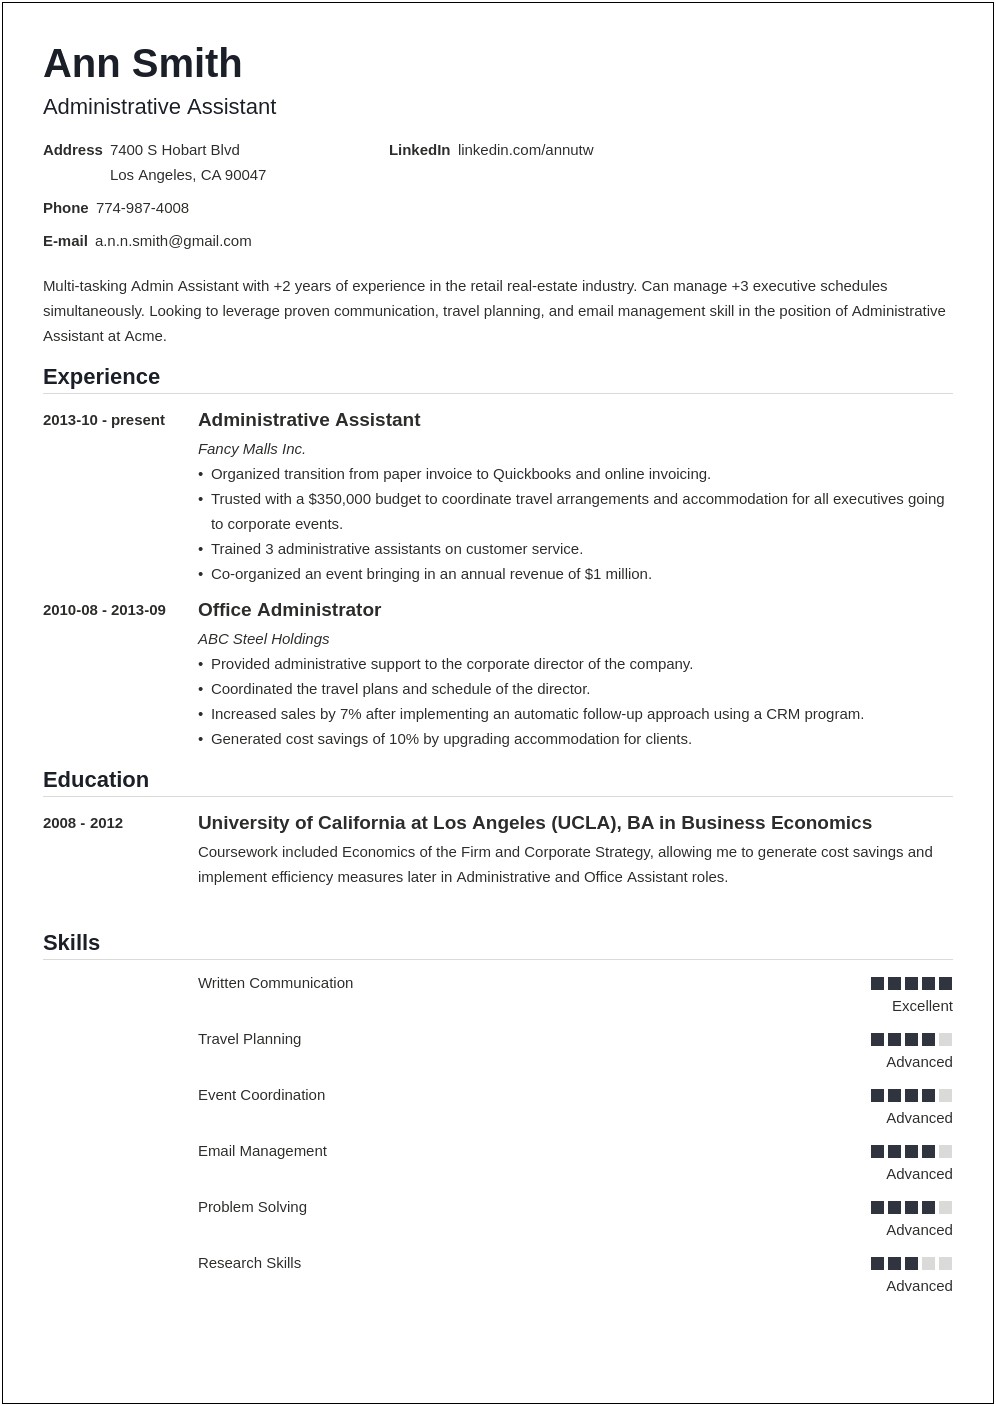 Resume Profile Samples For Administrative Assistant